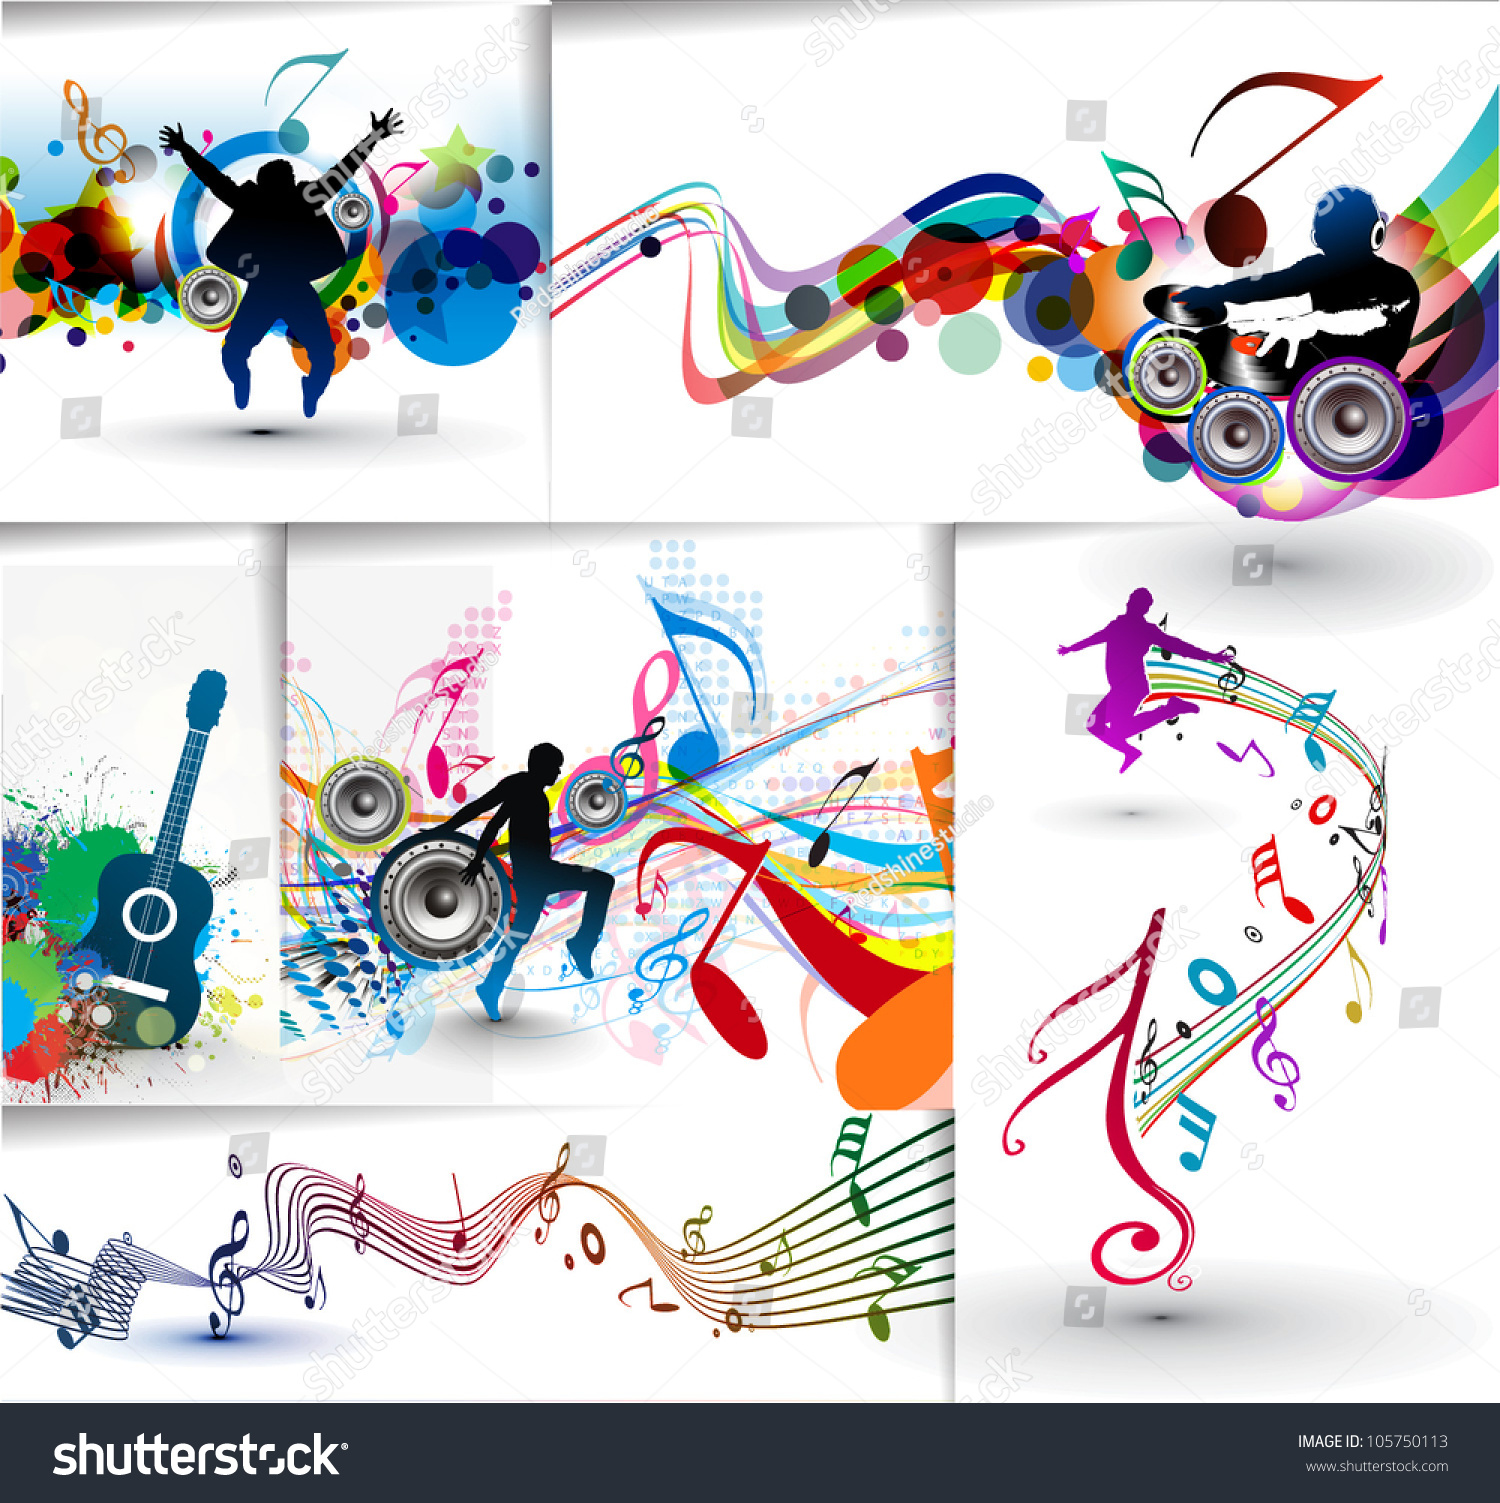 music event clipart - photo #19